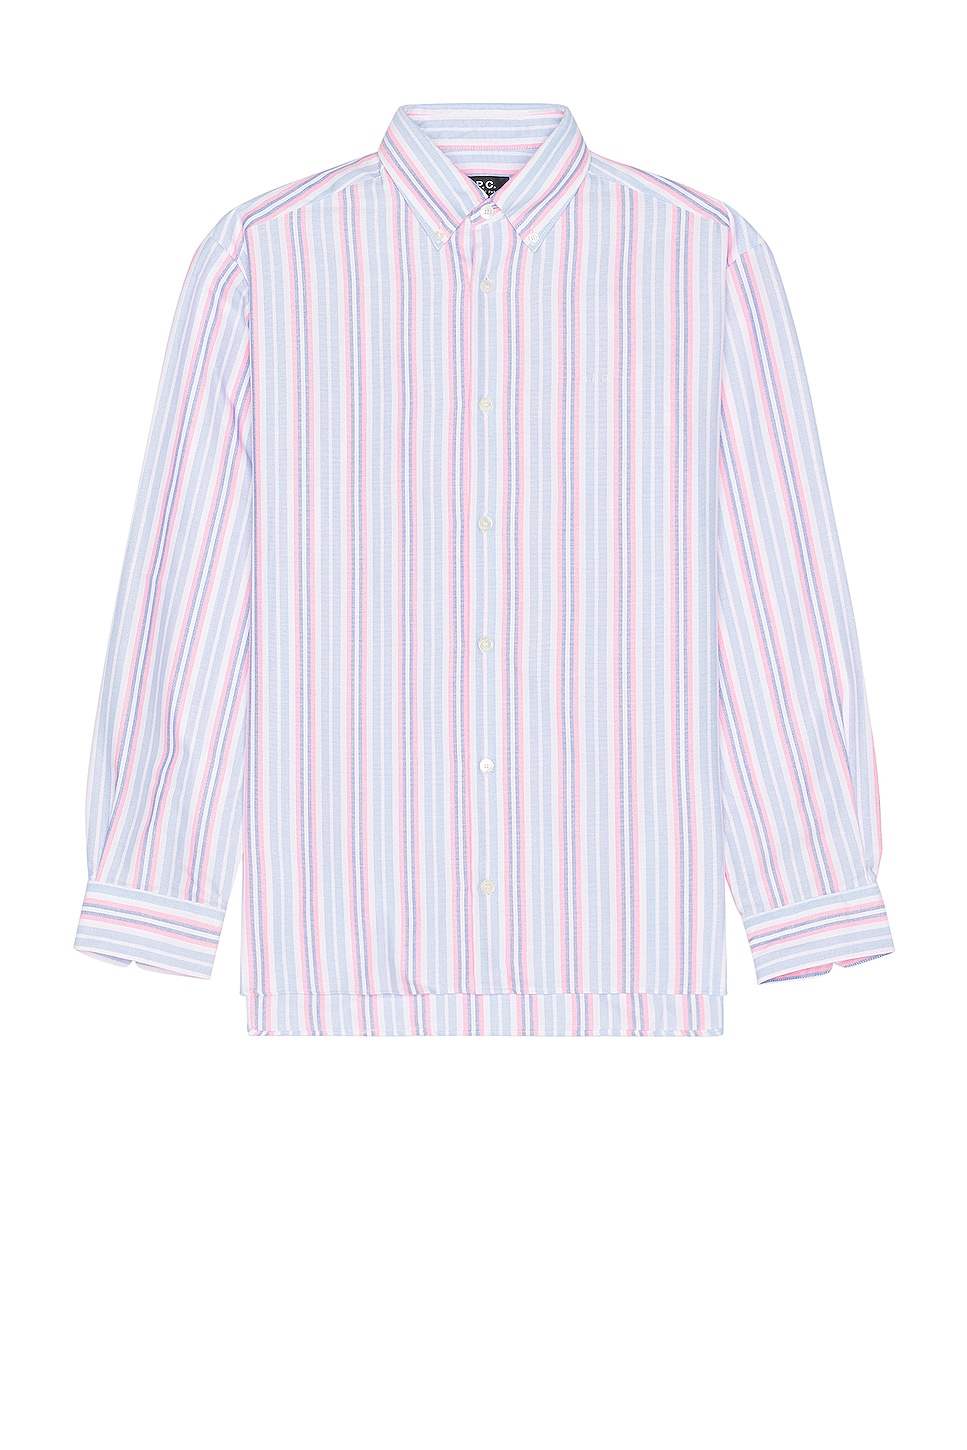 Image 1 of A.P.C. Chemise Mathias in Neon Pink